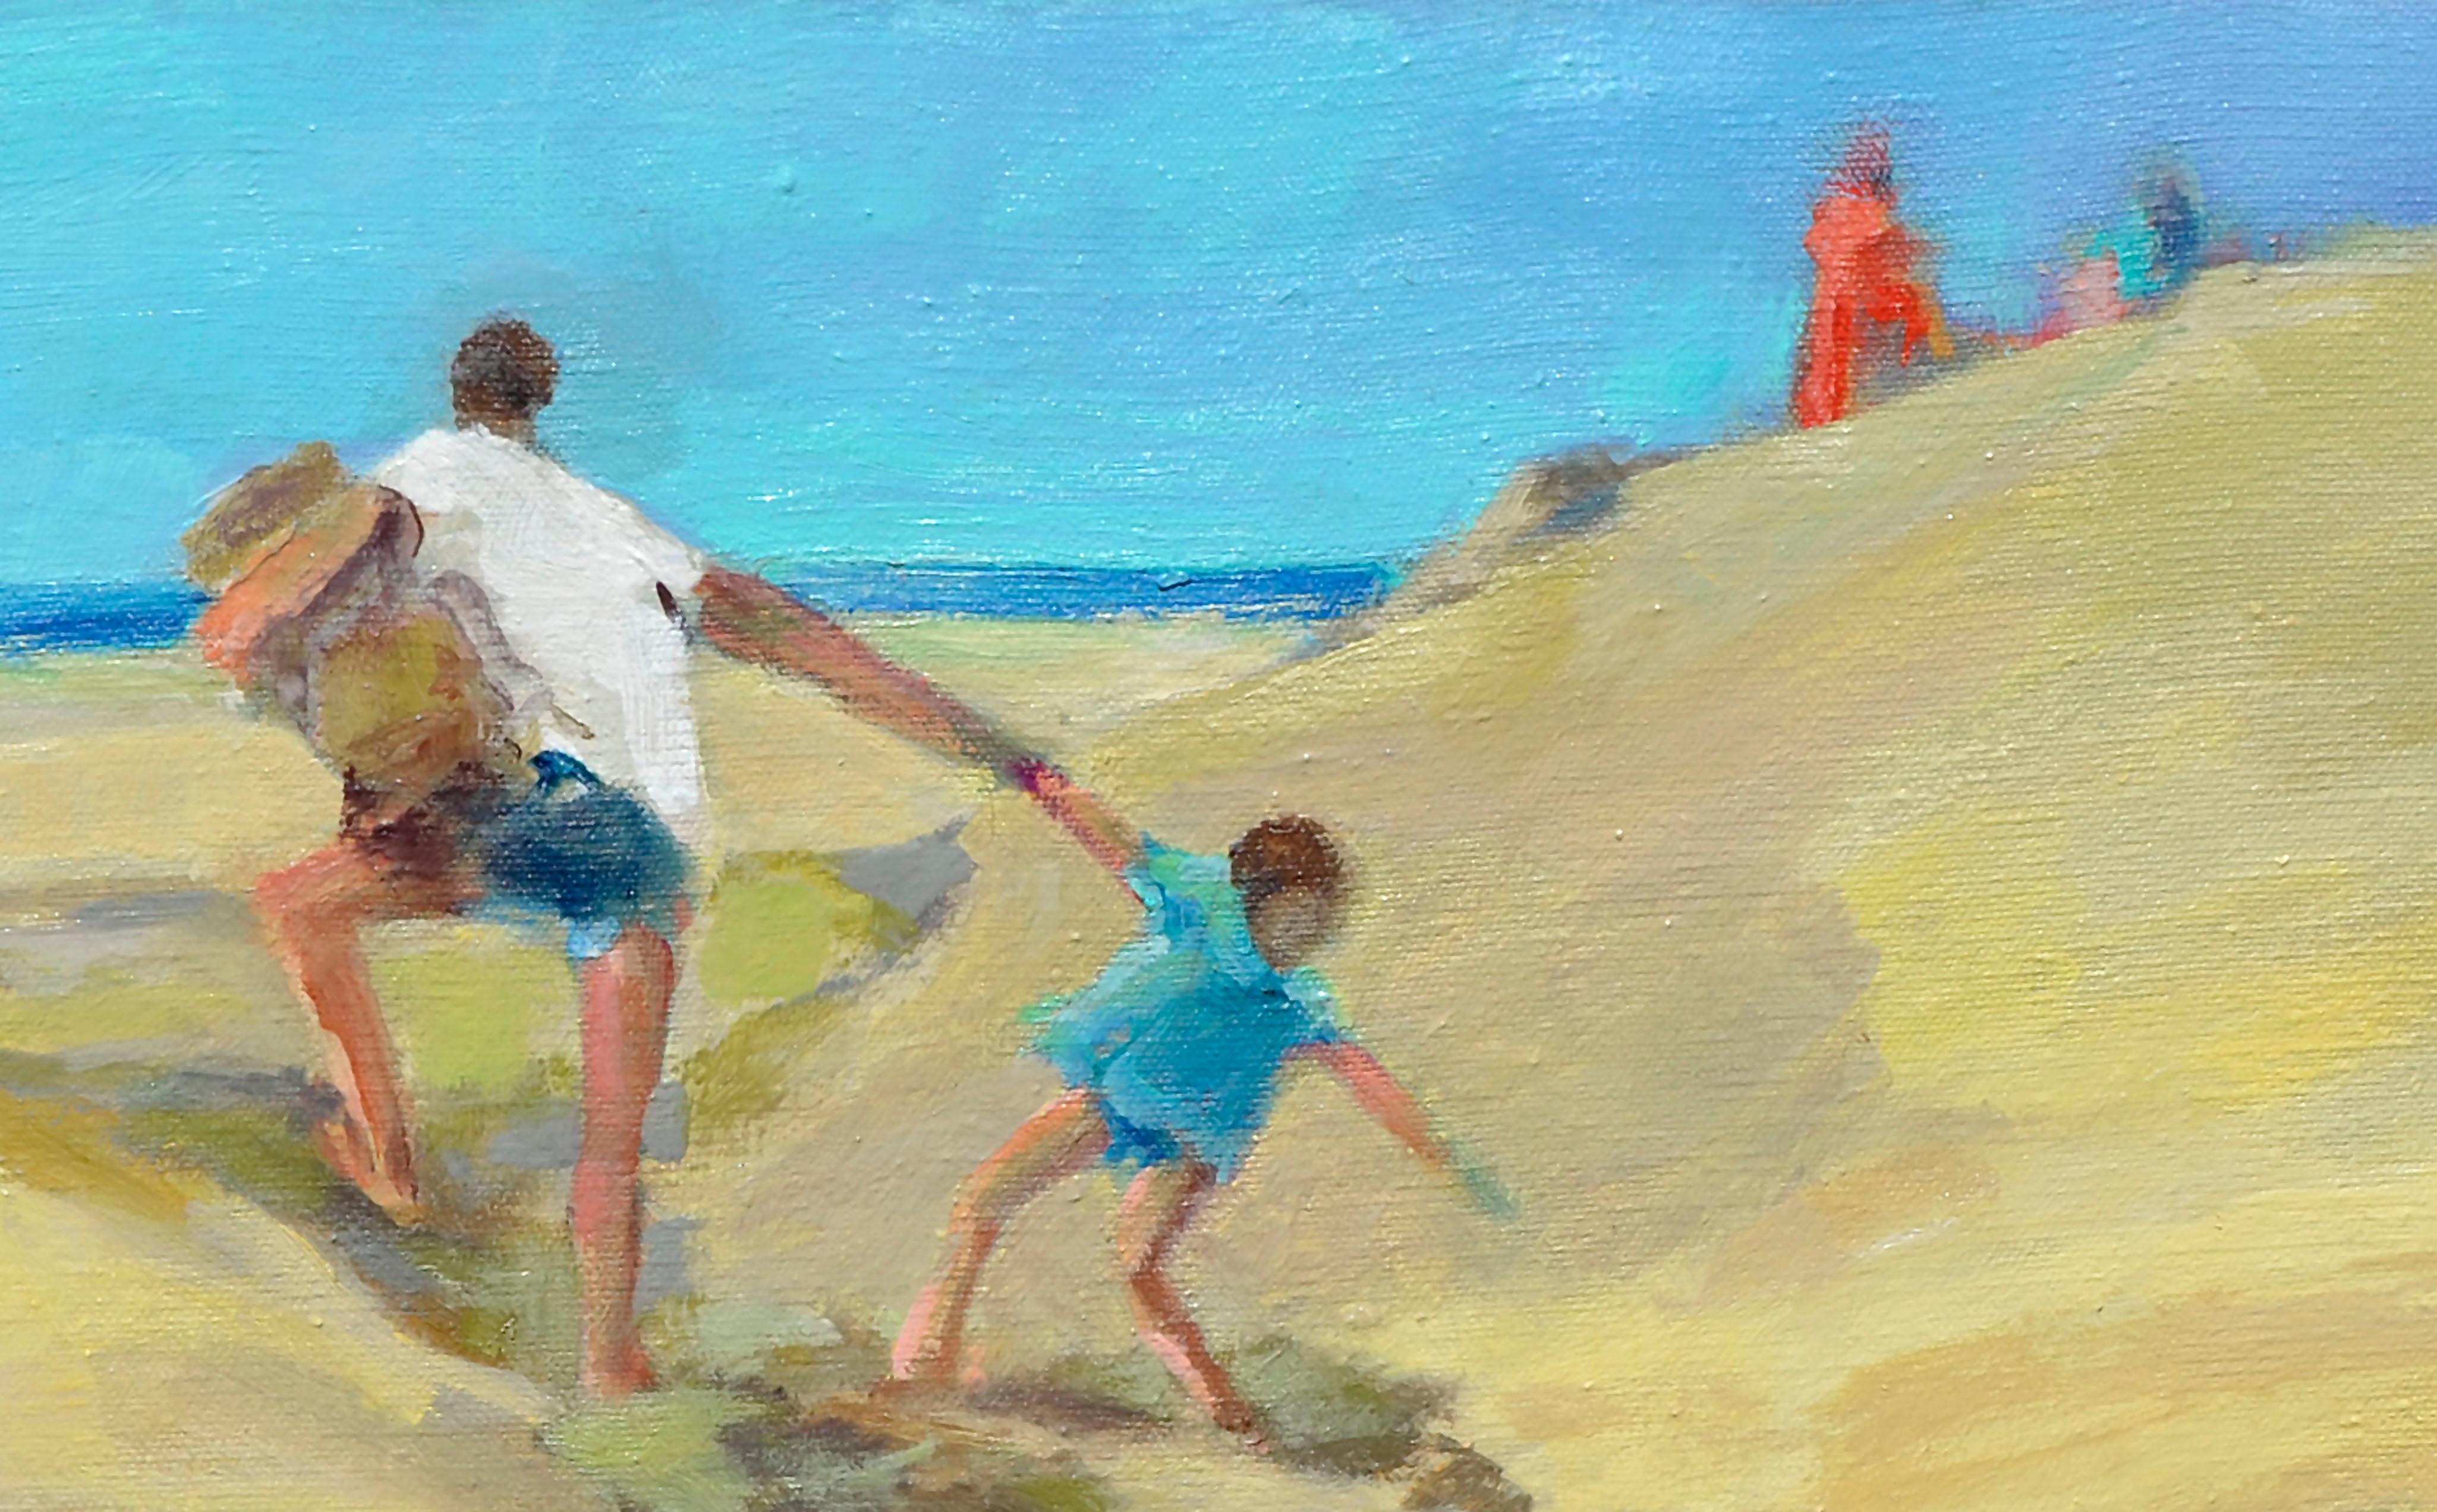 San Francisco Beach Day 1960 - American Impressionist Painting by Ruth Kinkead Duhring